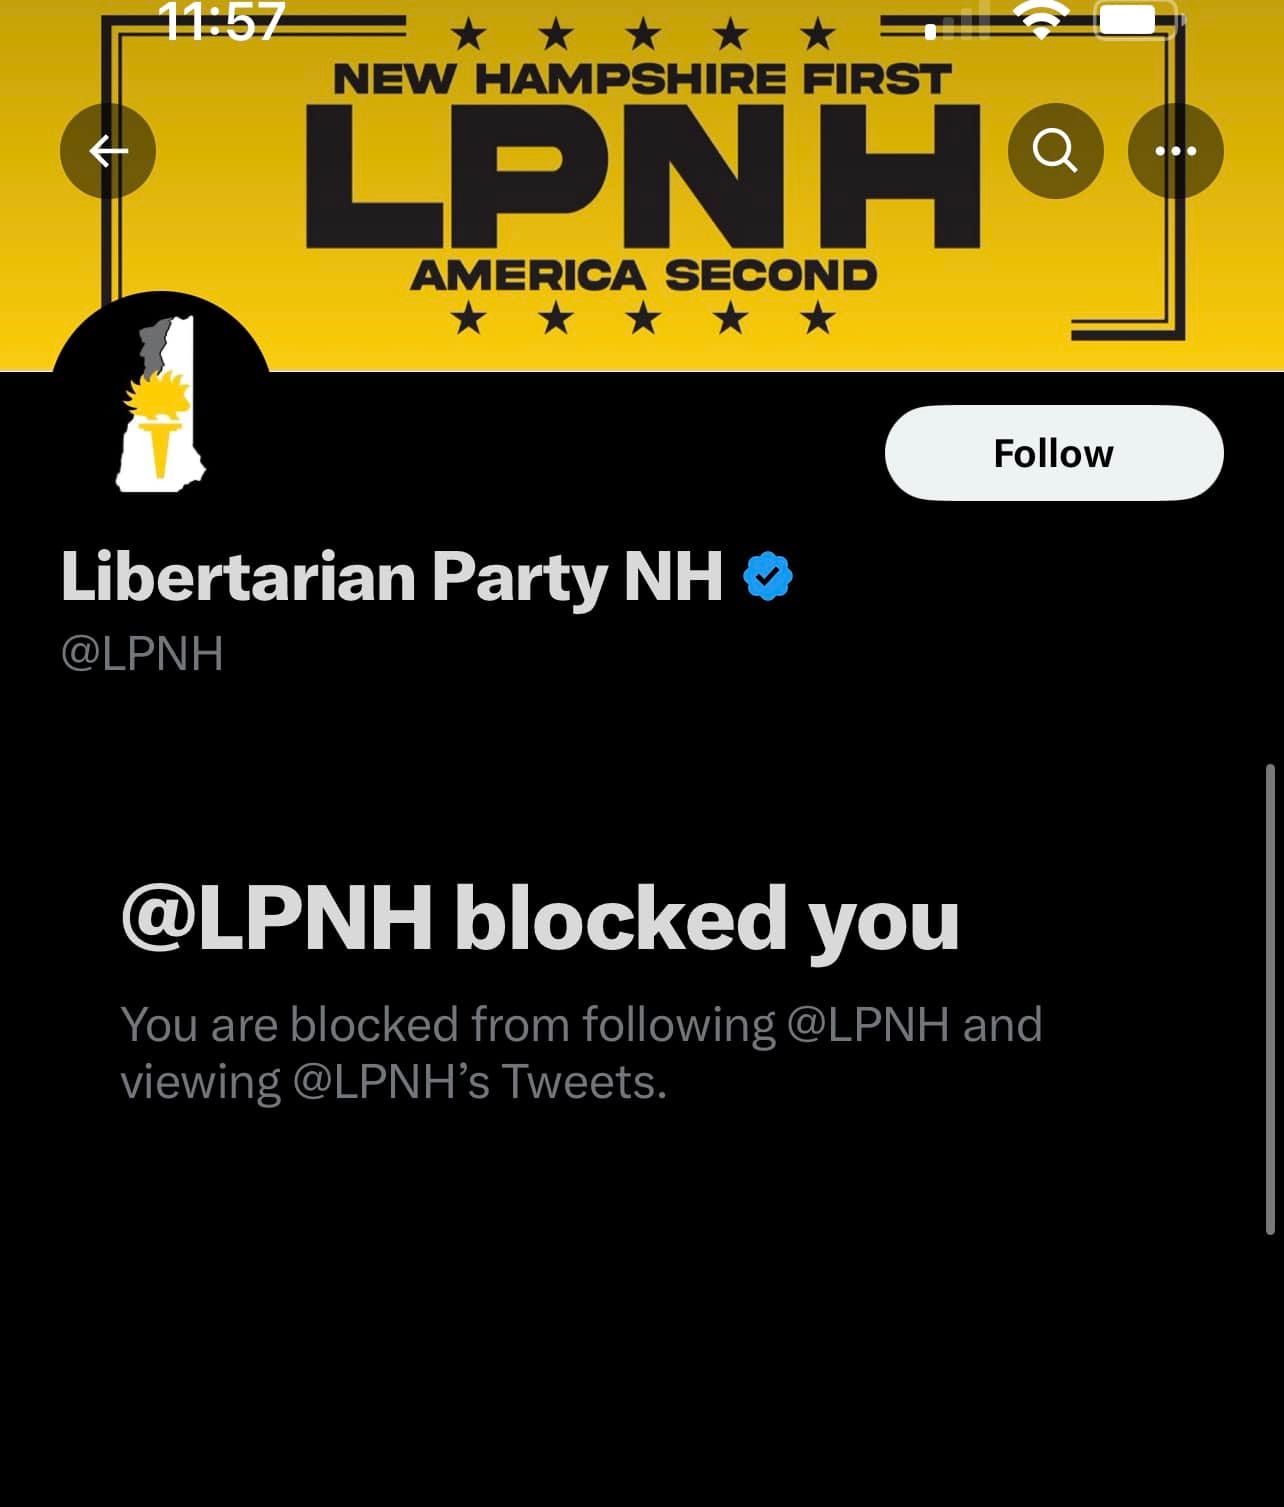 May be an image of text that says '11:57 NEW HAMPSHIRE FIRST LPNH AMERICA SECOND Follow Libertarian Party NH @LPNH @LPNH blocked you blocked from following following@LPNHand viewing@LPNH'sTweets Tweets.'